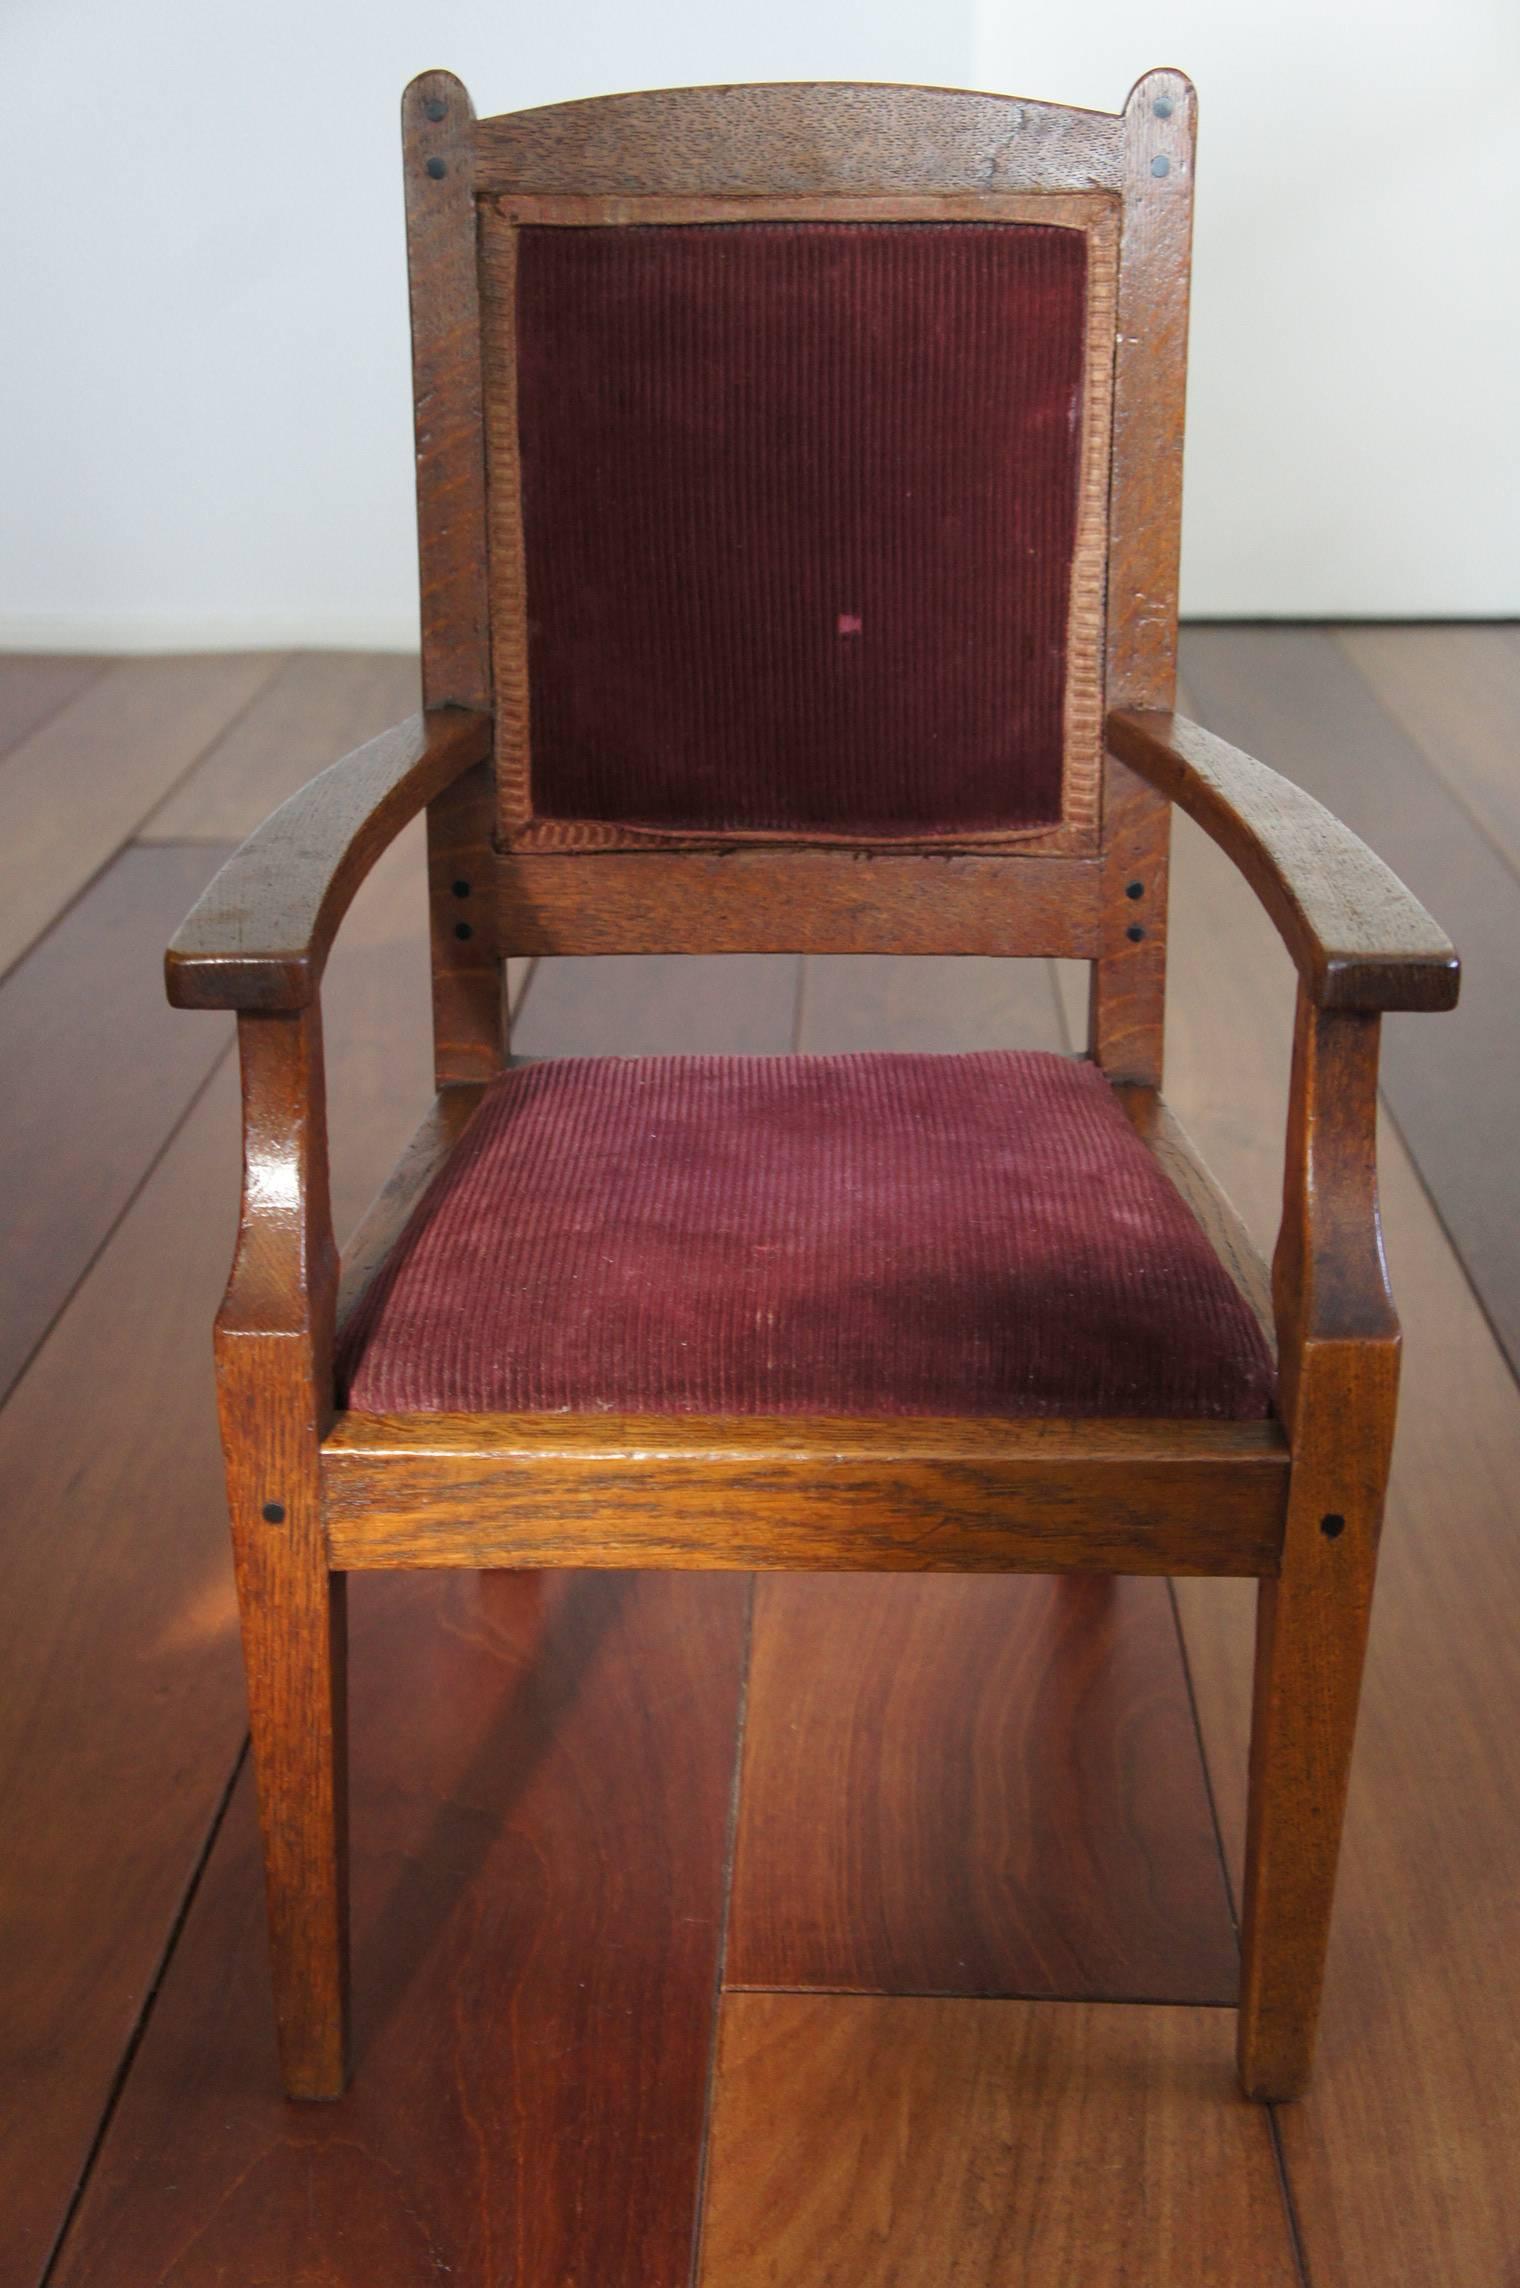 Dutch Arts and Crafts Children's or Miniature Chair Attributed to Jac van den Bosch For Sale